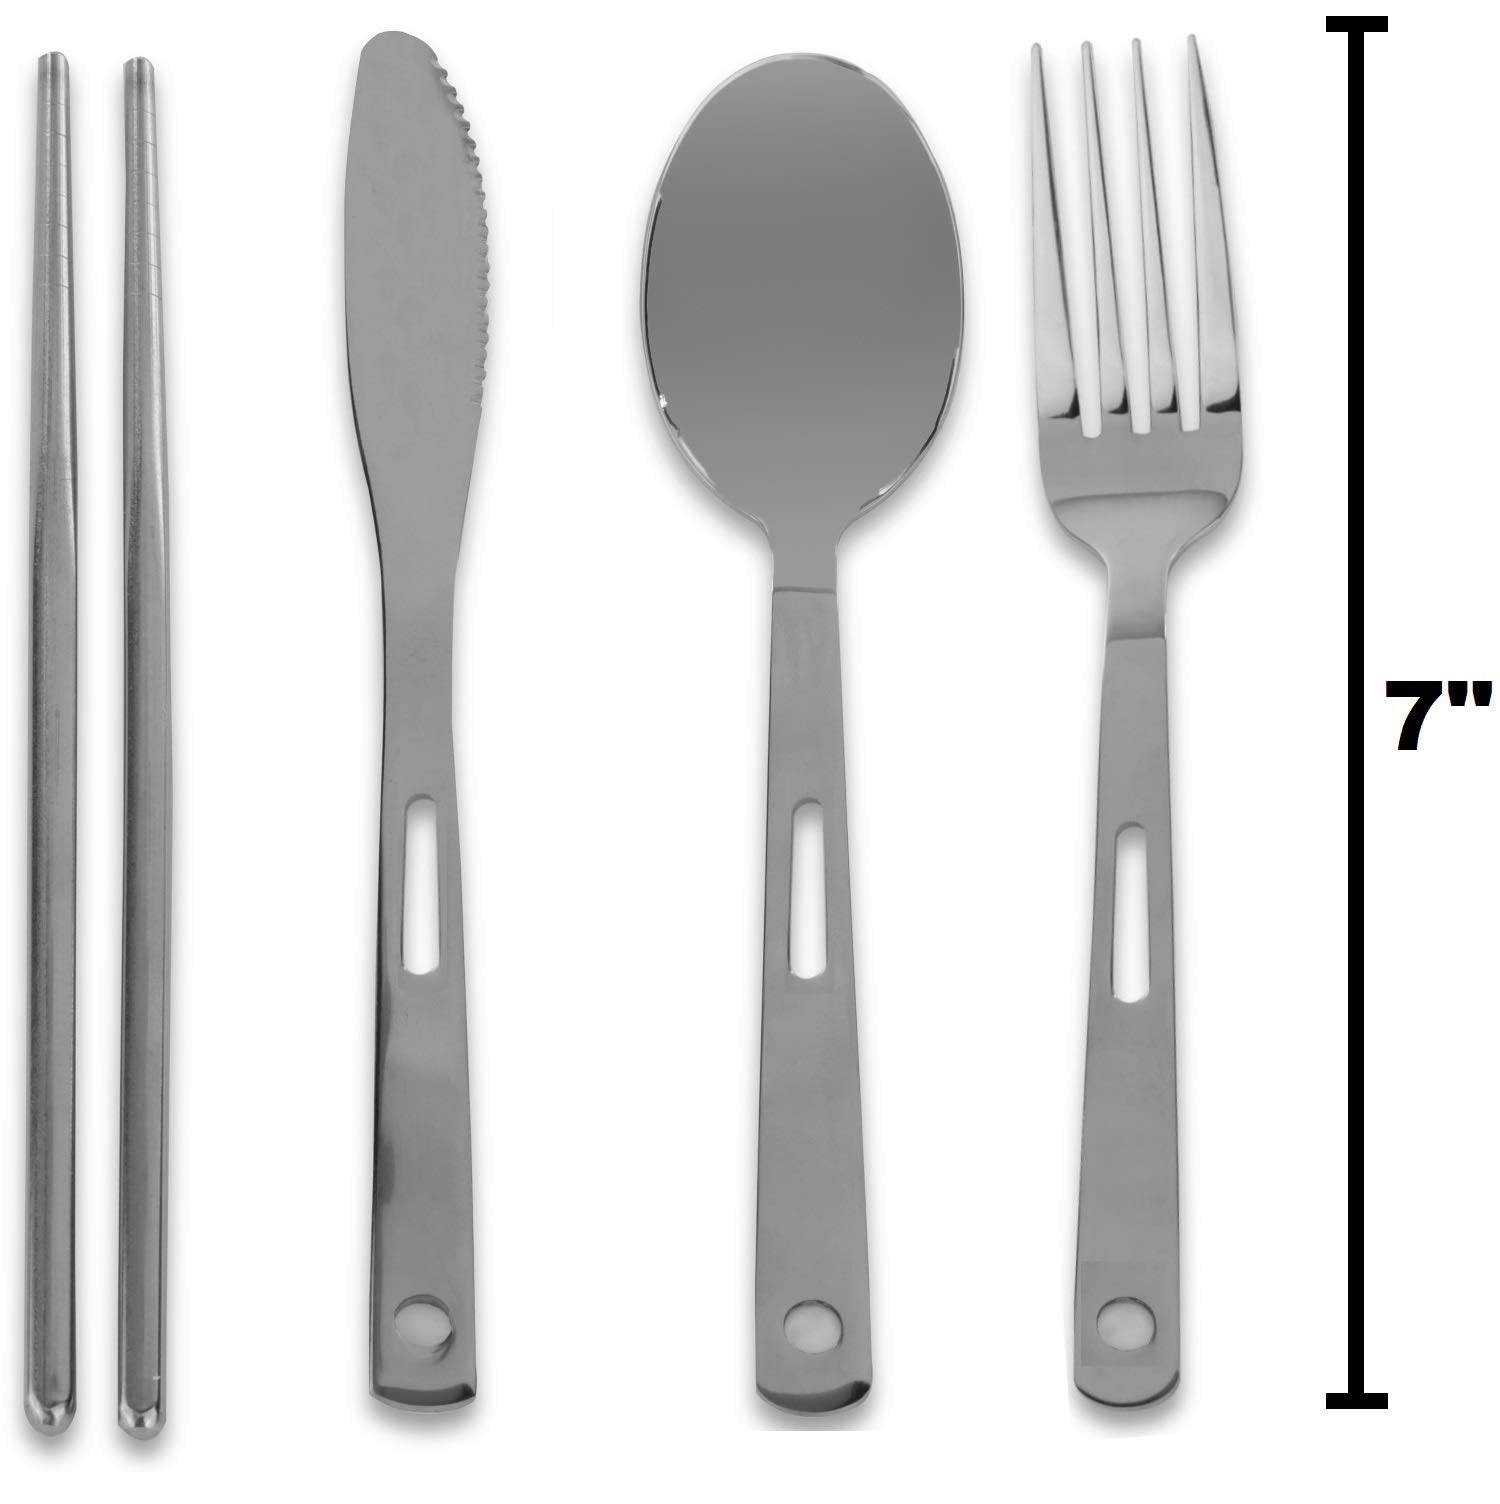 13 Piece Stainless Steel Family Cutlery Picnic Utensil Set with Travel Case for Camping | Hiking | BBQs - Includes Forks | Spoons | Knifes | Chopstick, Plus Nylon Commuter Case (Green)